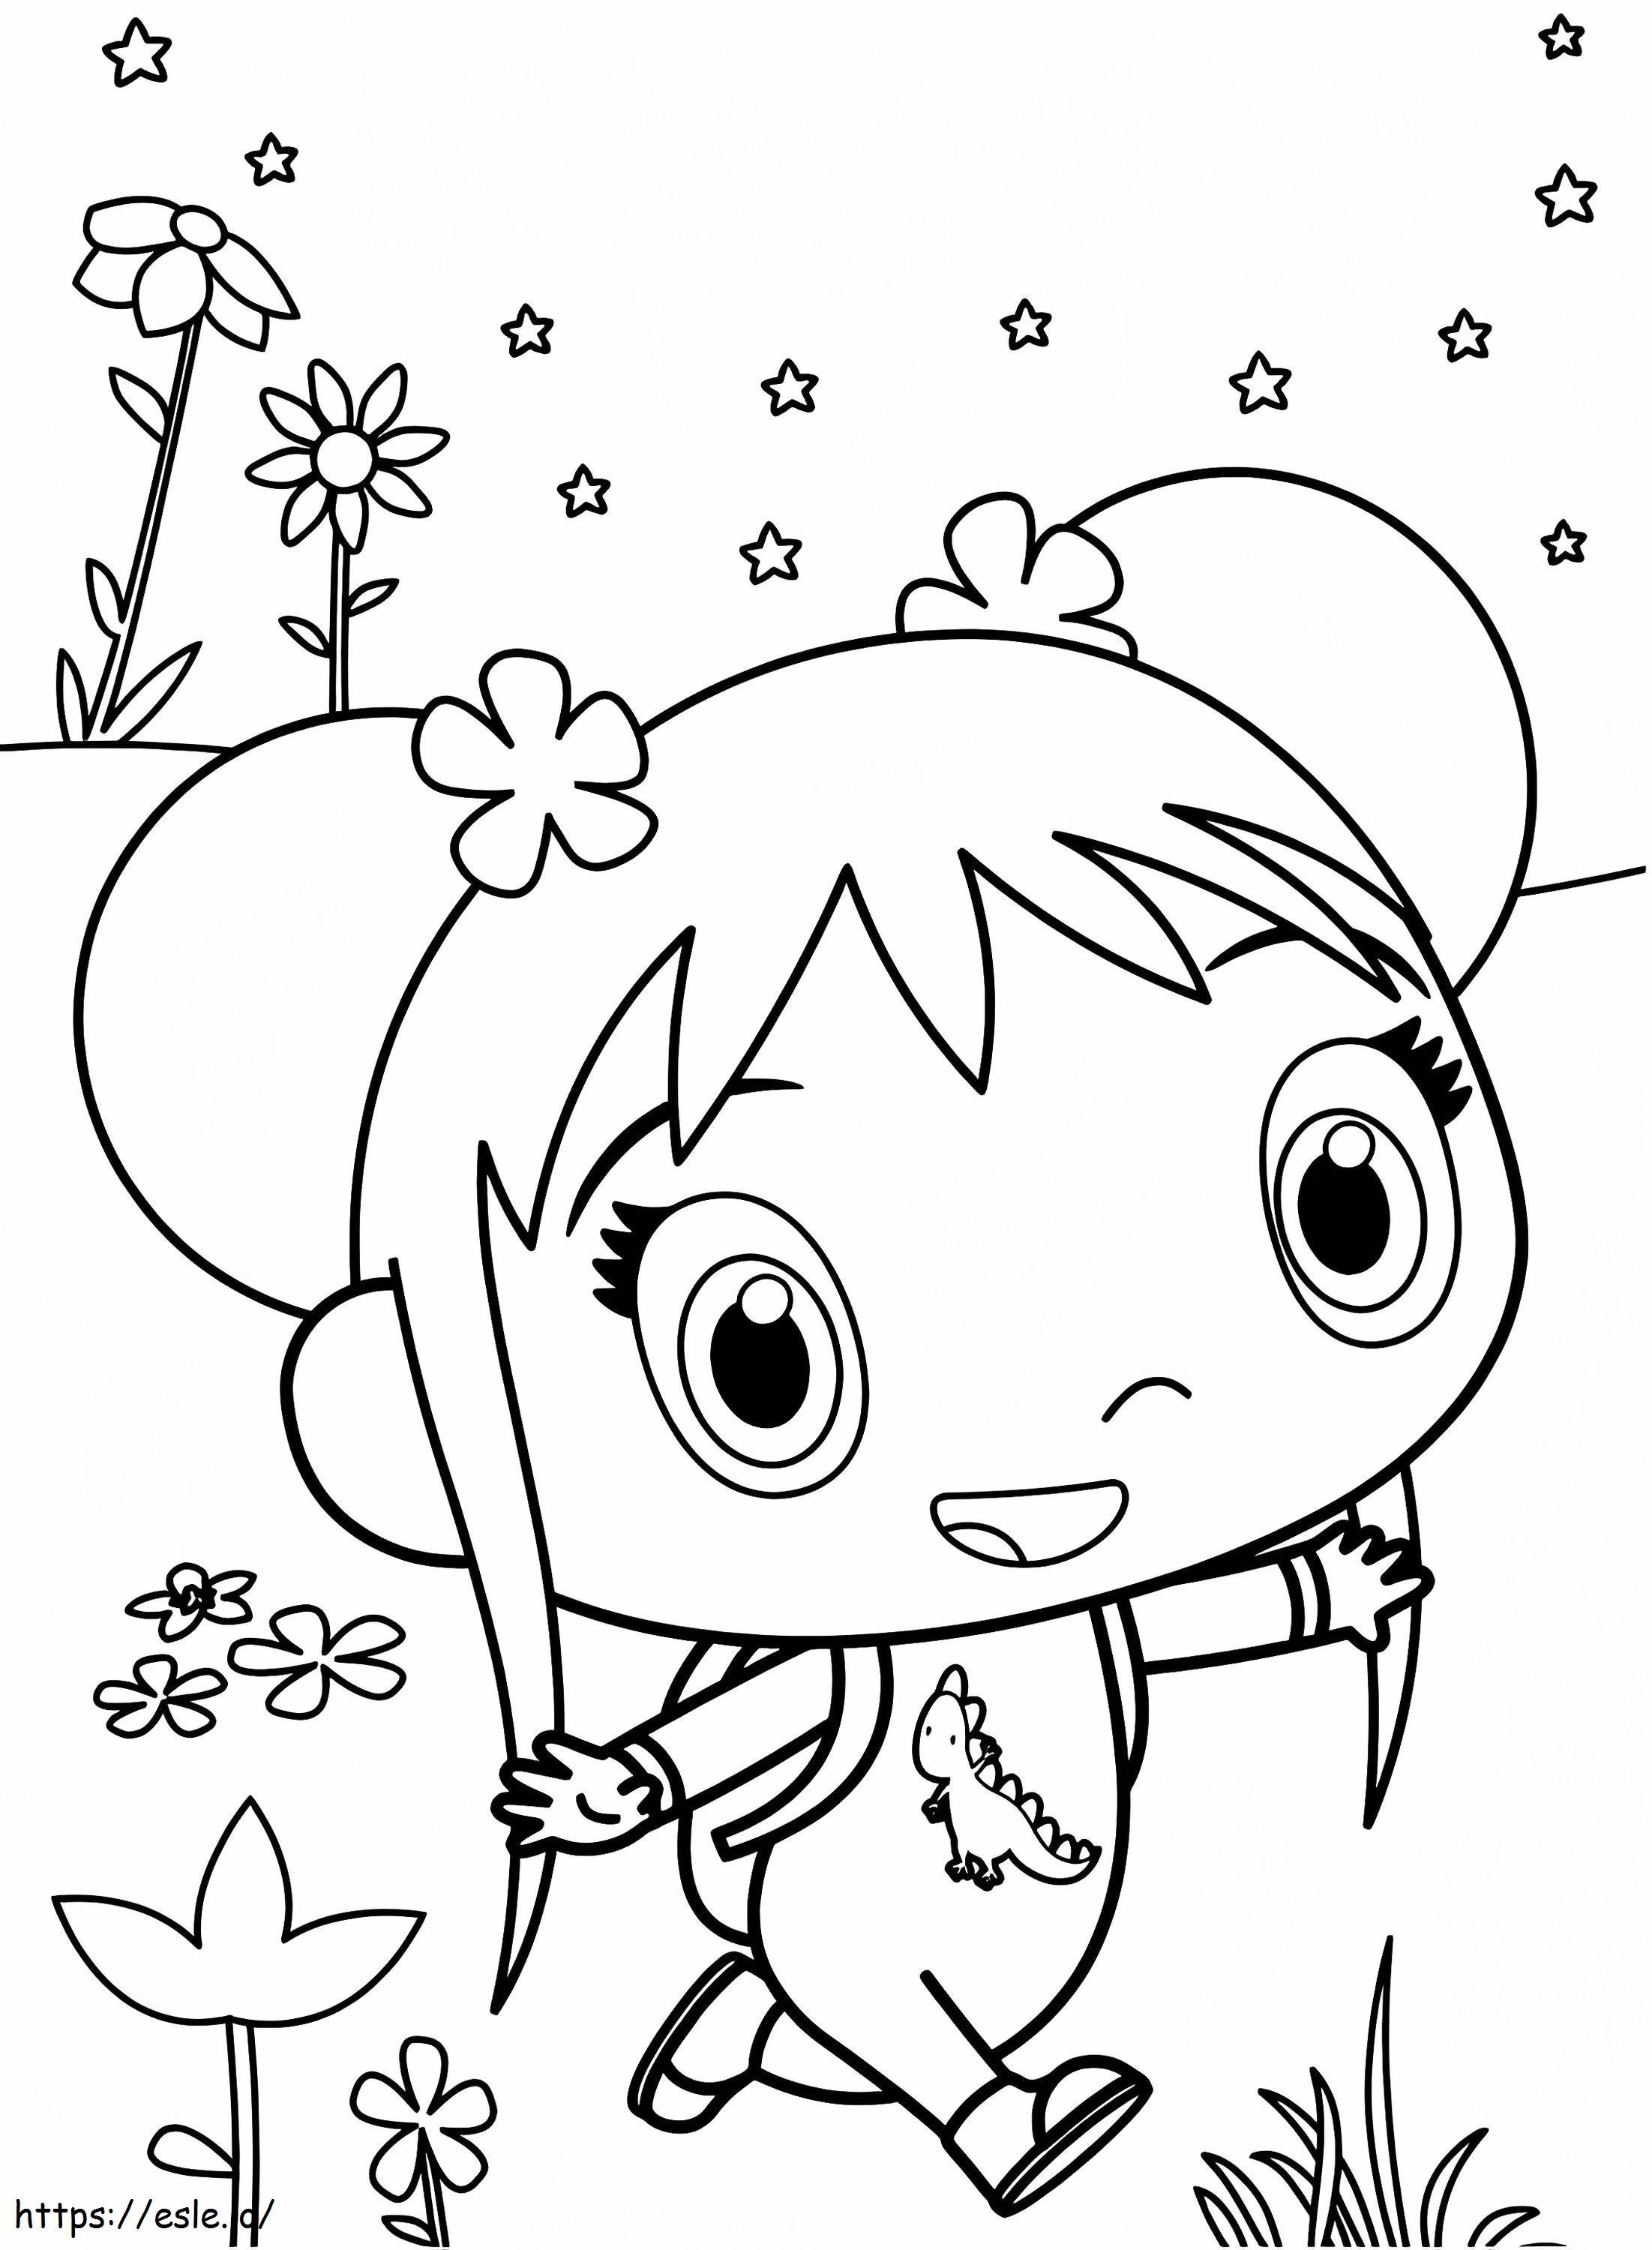 1536220923 When Walking A4 coloring page